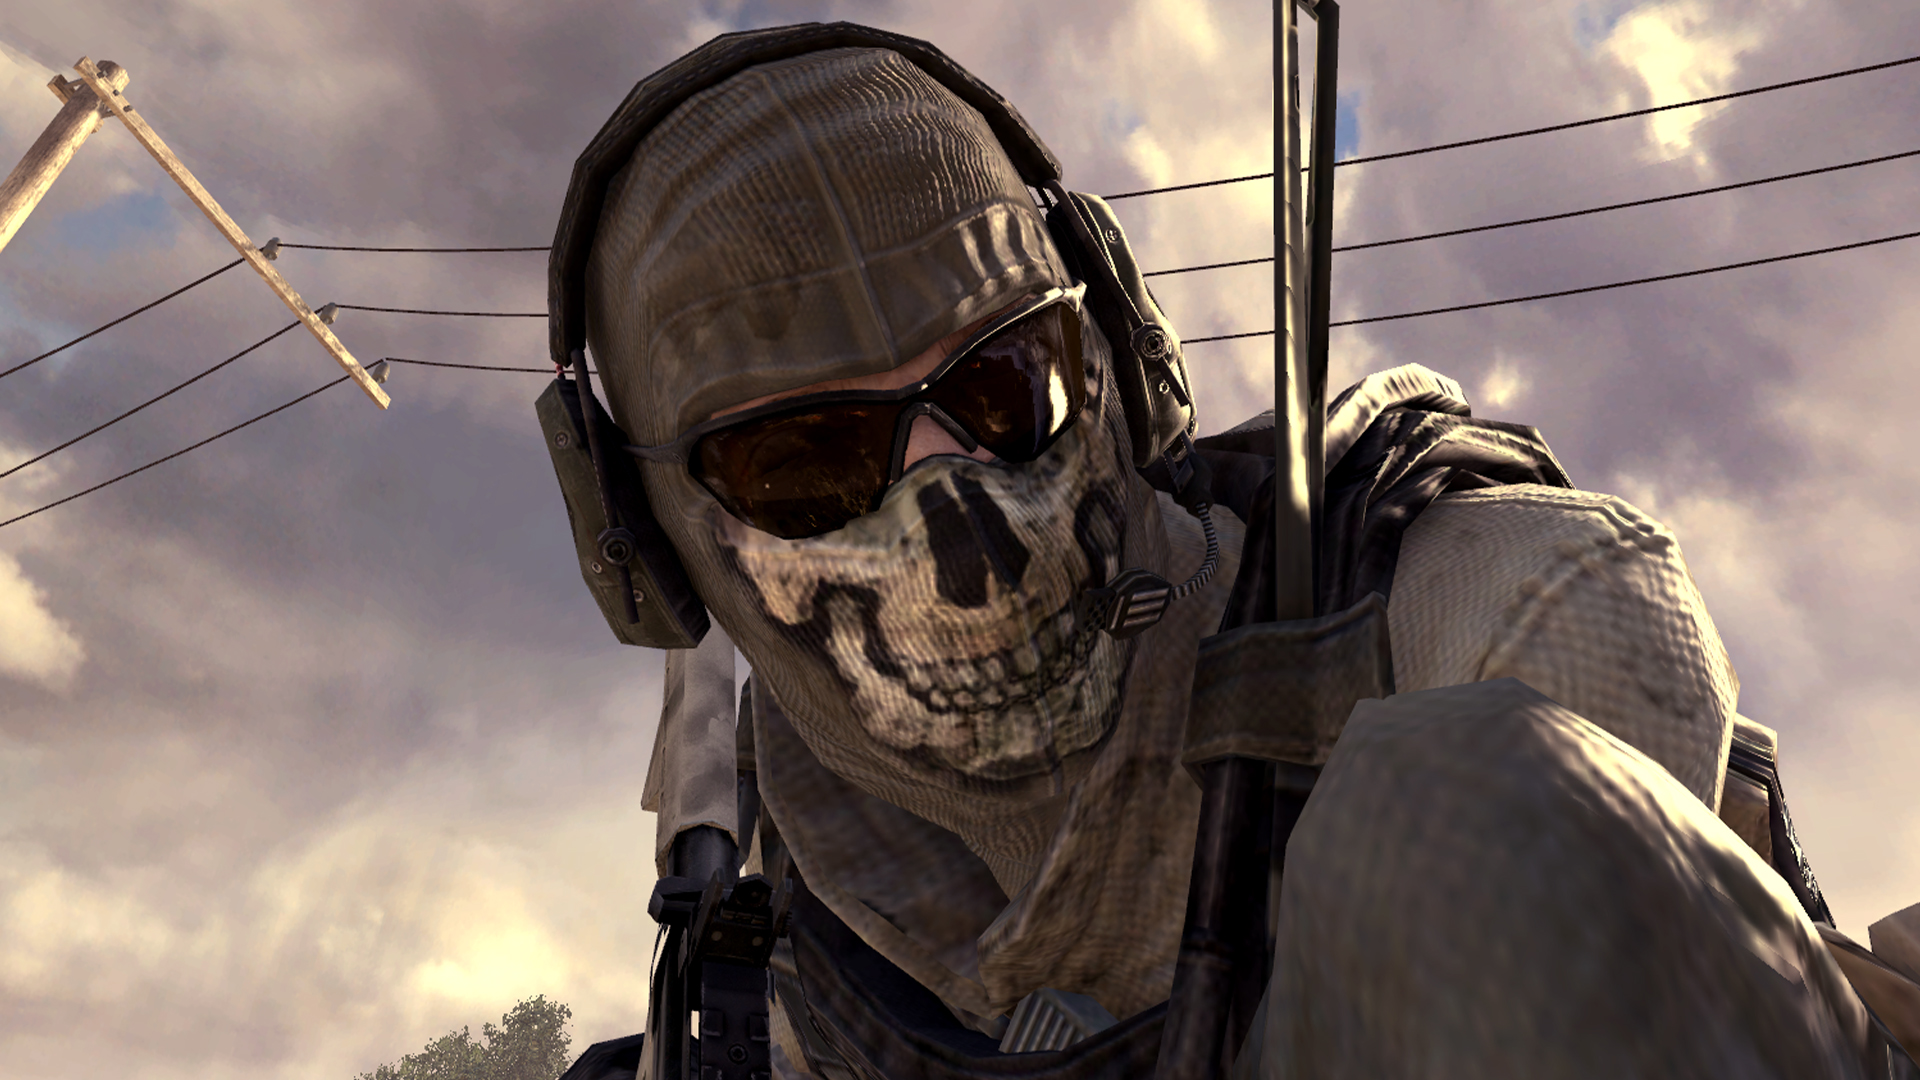 Want to know what Call of Duty: Modern Warfare 2's Ghost looks